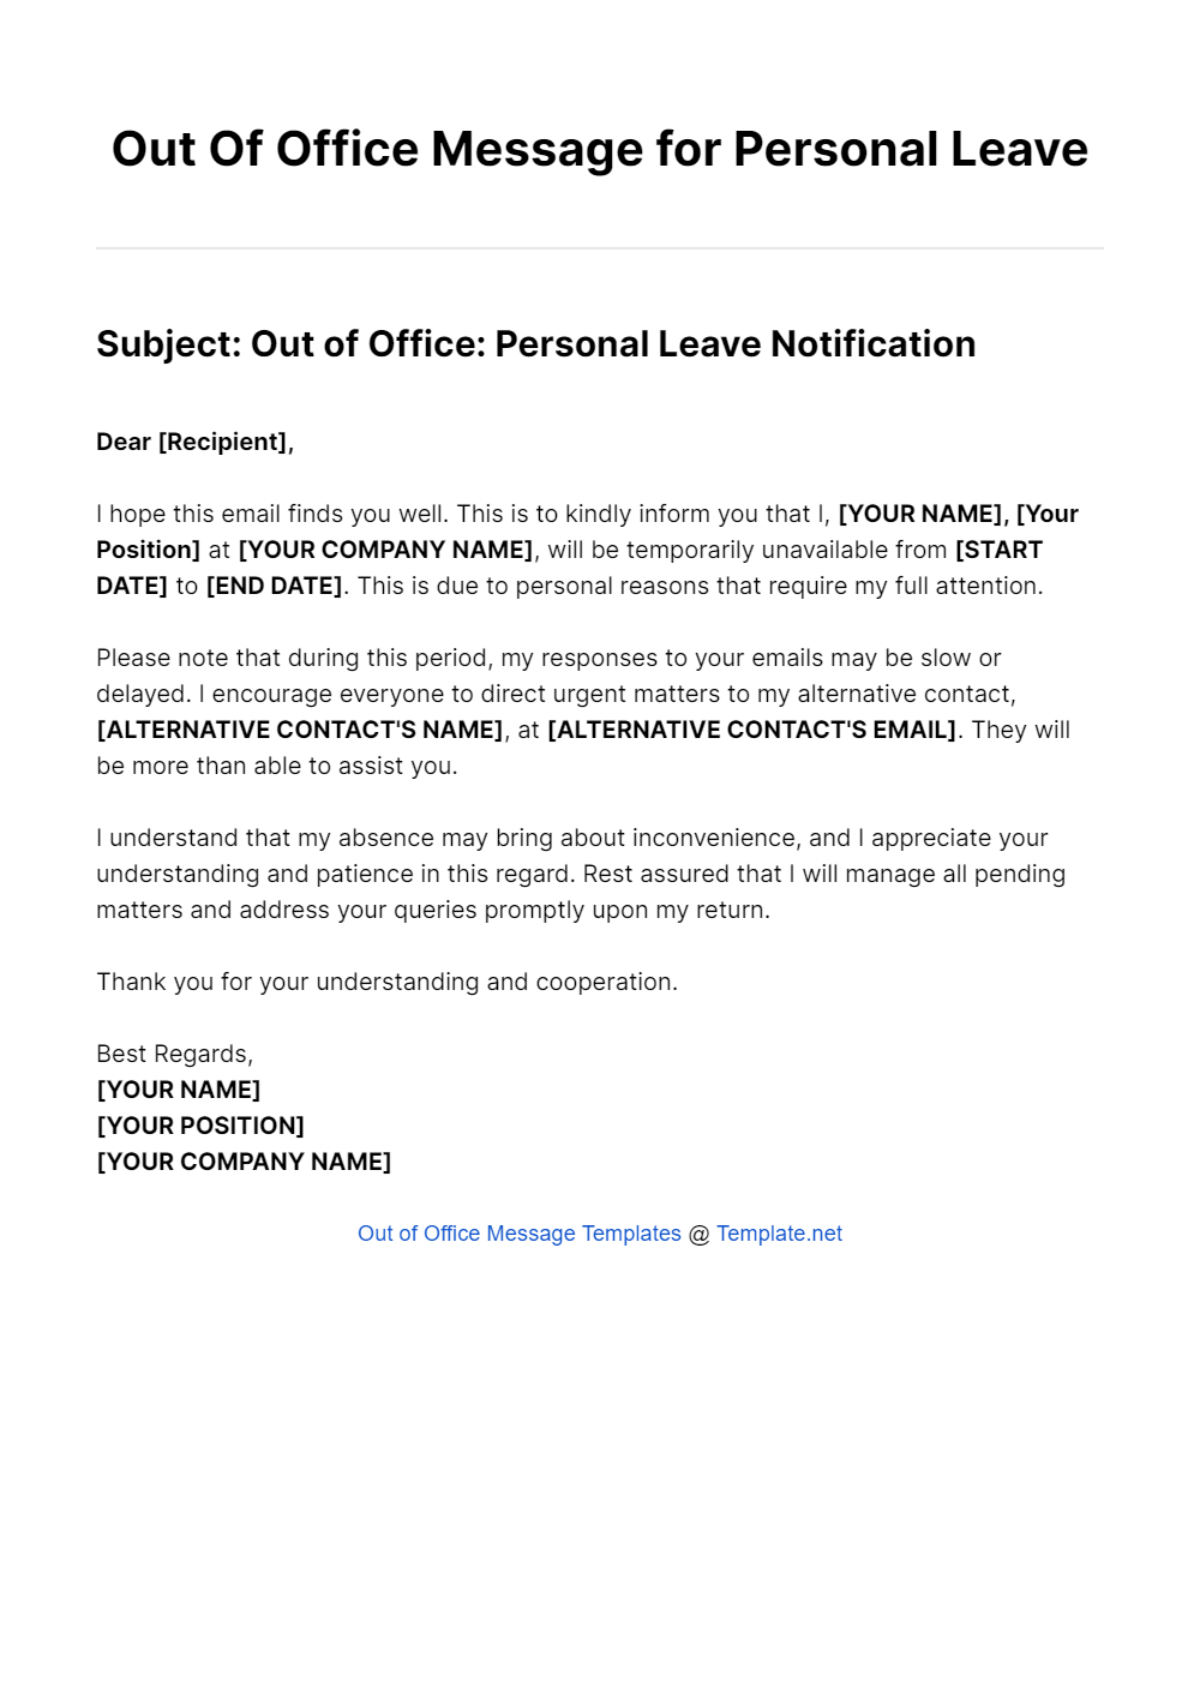 Out Of Office Message for Personal Leave Template